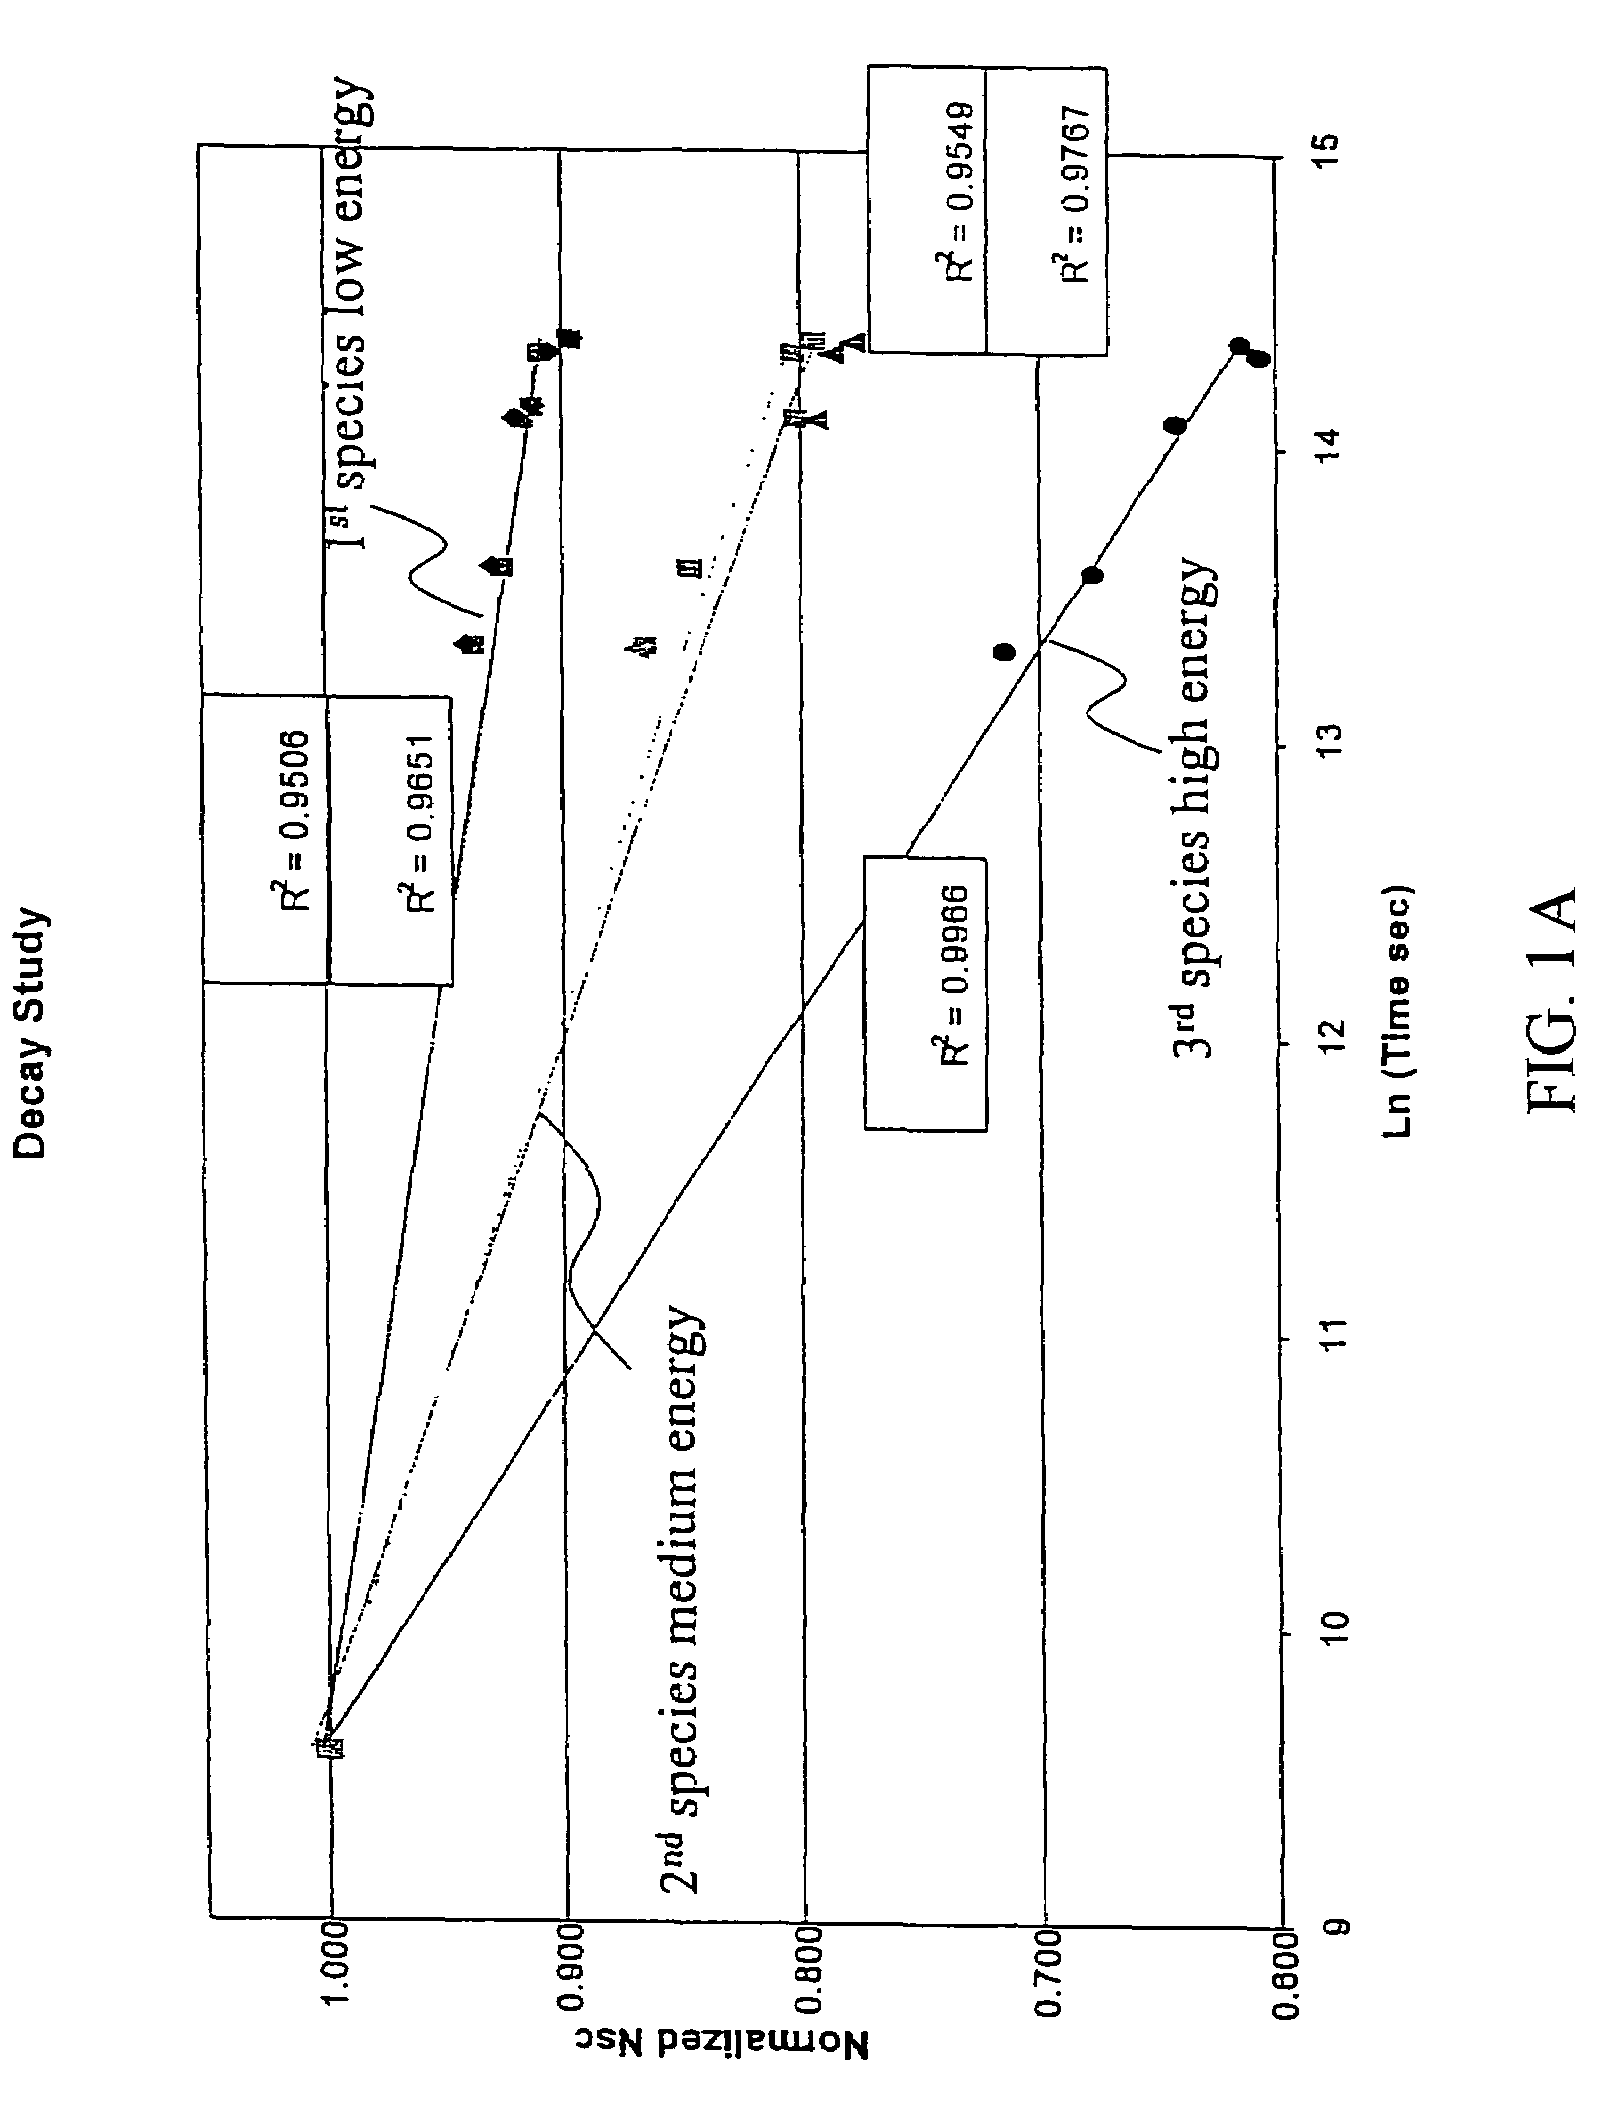 Apparatus and method of measuring defects in an ion implanted wafer by heating the wafer to a treatment temperature and time to substantially stabilize interstitial defect migration while leaving the vacancy defects substantially unaltered.